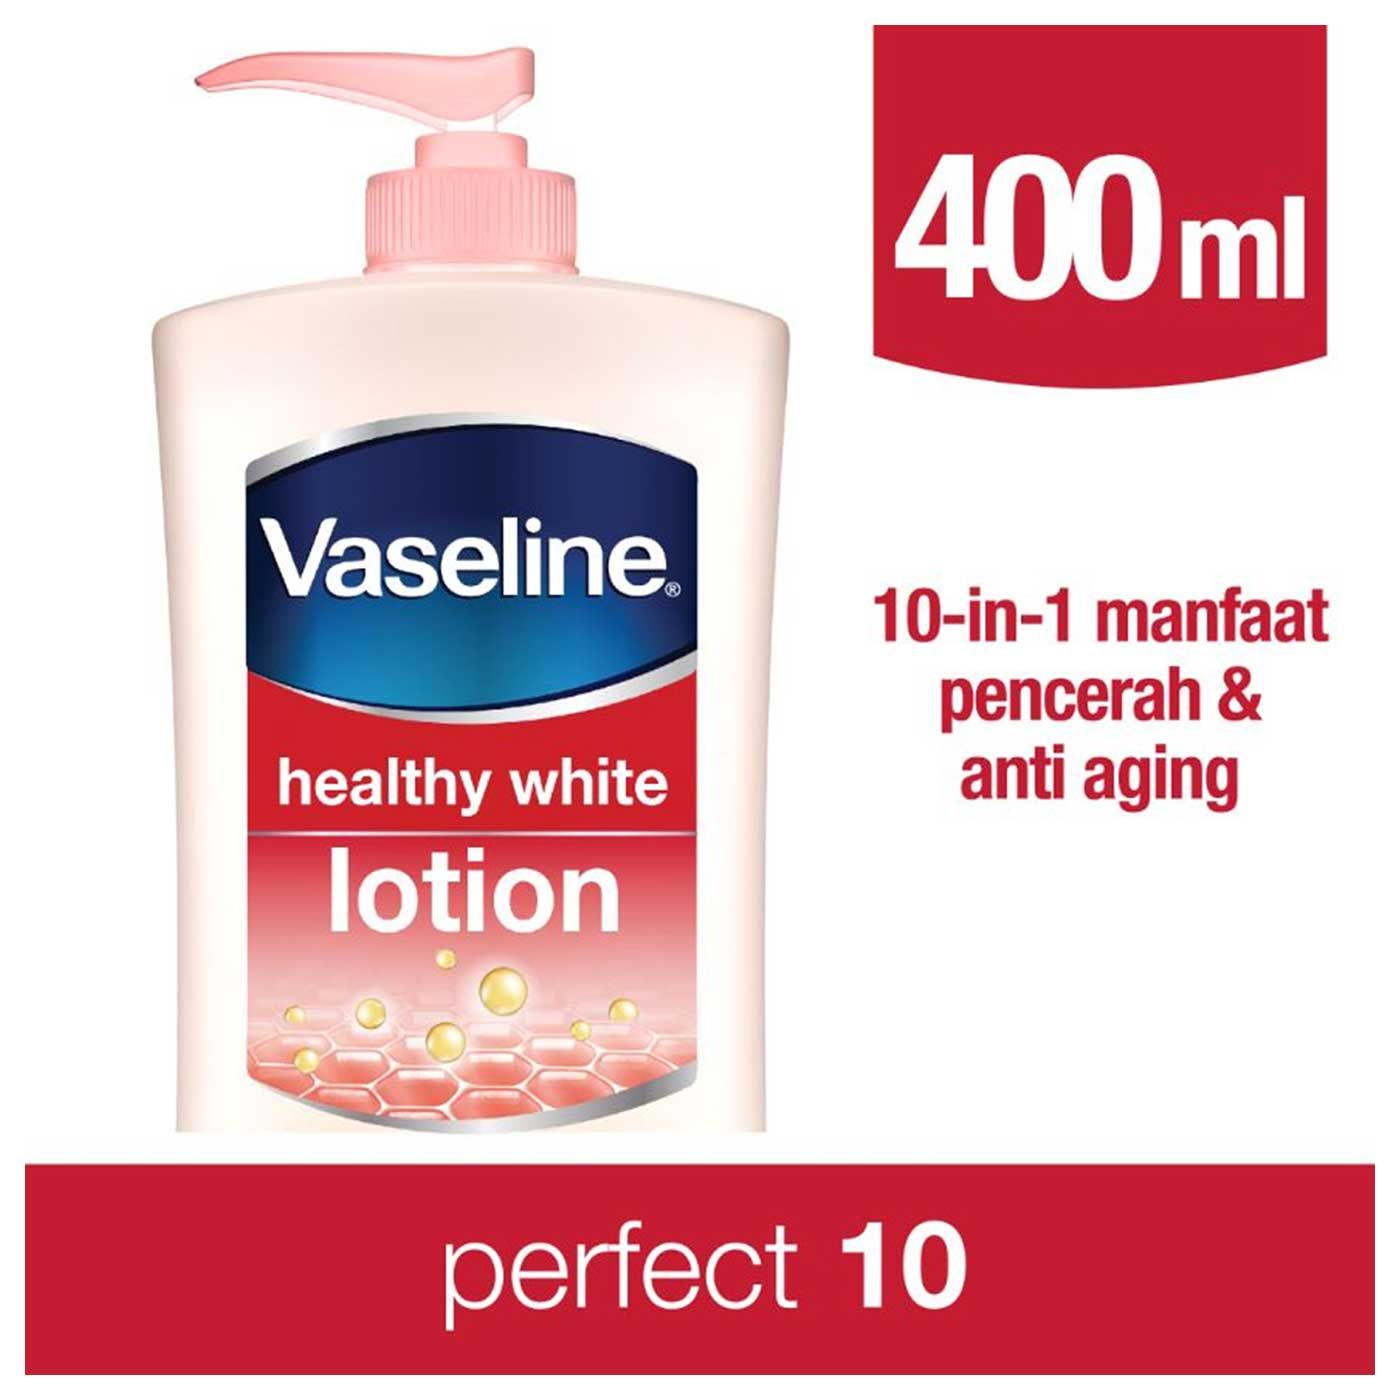 Vaseline Lotion Healthy White Perfect 10 400ml - 1